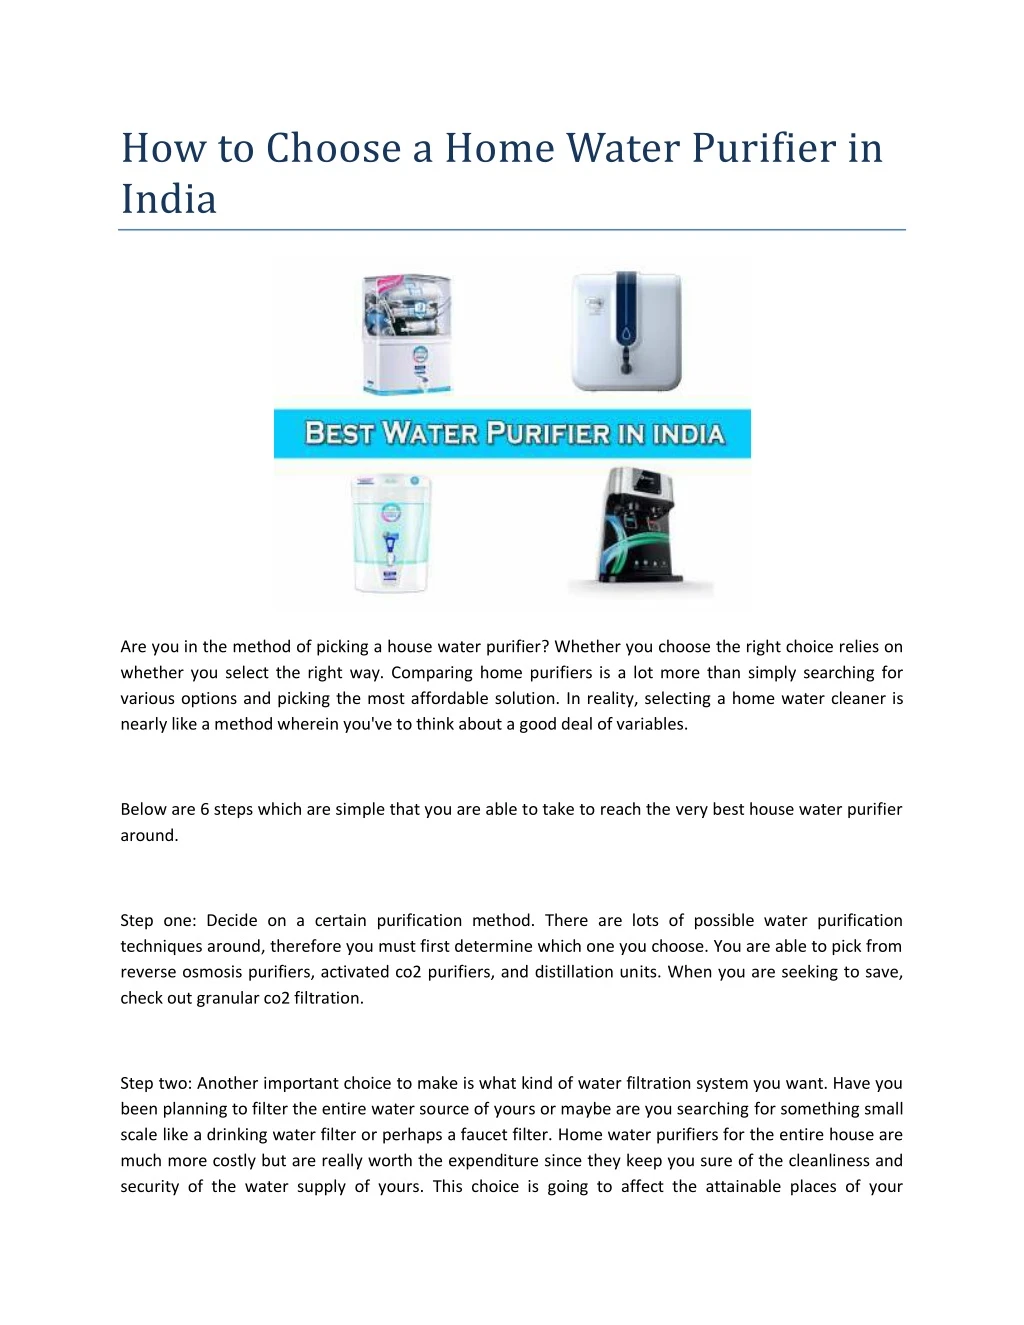 how to choose a home water purifier in india